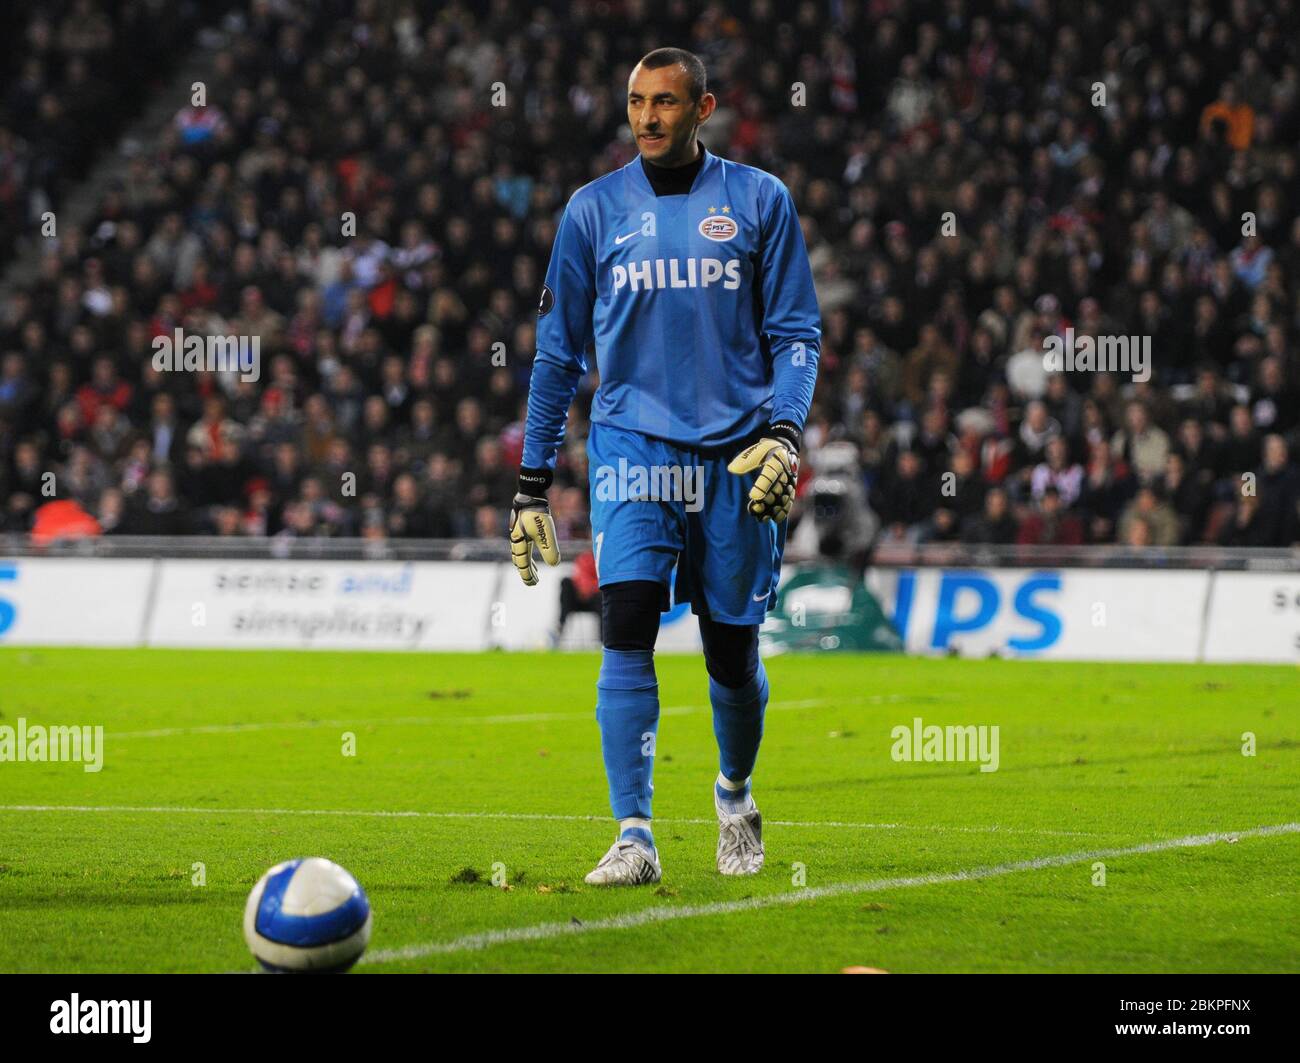 EINDHOVEN, NEDERLAND. MARCH 12: Heurelho Gomes of PSV Eindhoven During UEFA Cup Round of 16 Second Leg between PSV Eindhoven and Tottenham Hotspur at Stock Photo